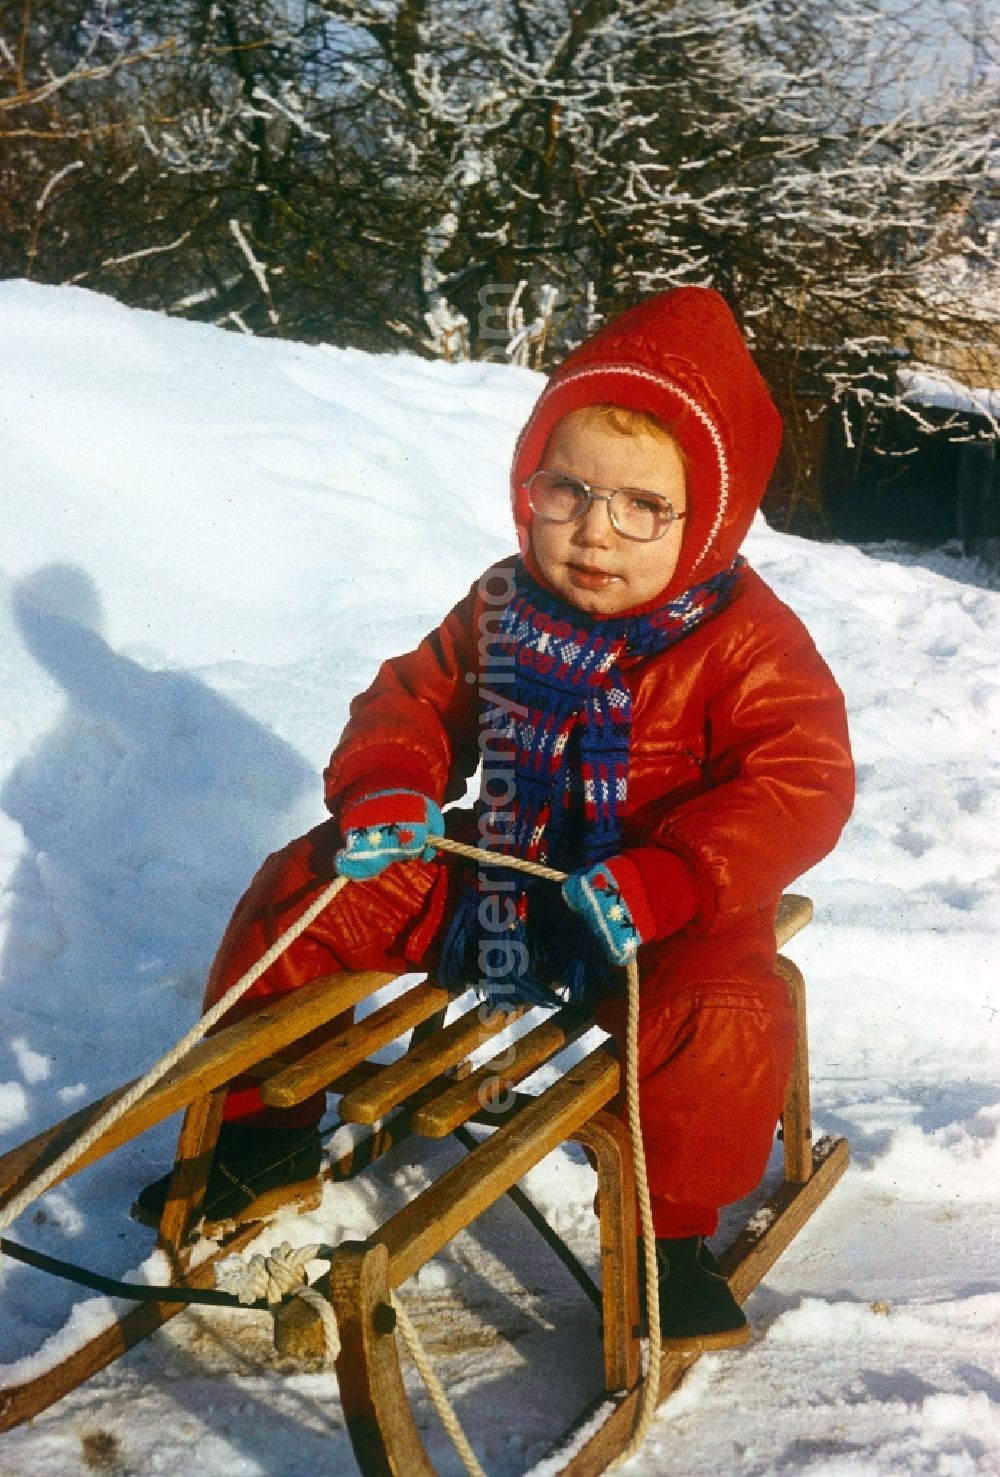 GDR picture archive: Neustrelitz - A small child with glasses in a red snowsuit on a sledge in the snow in Neustrelitz in the state of Mecklenburg-Western Pomerania in the territory of the former GDR, German Democratic Republic